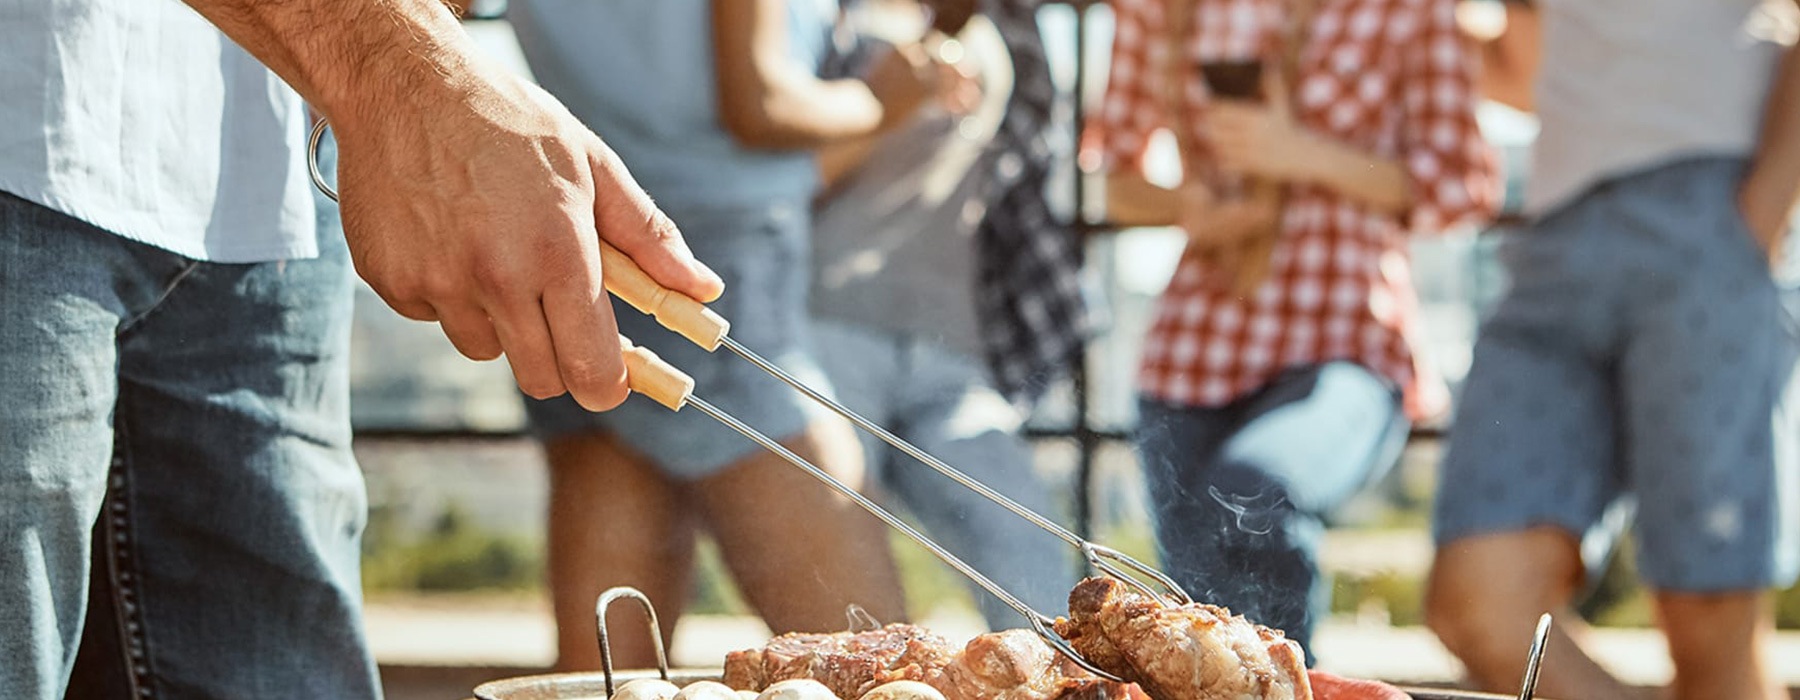 lifestyle image of a person grilling outdoors